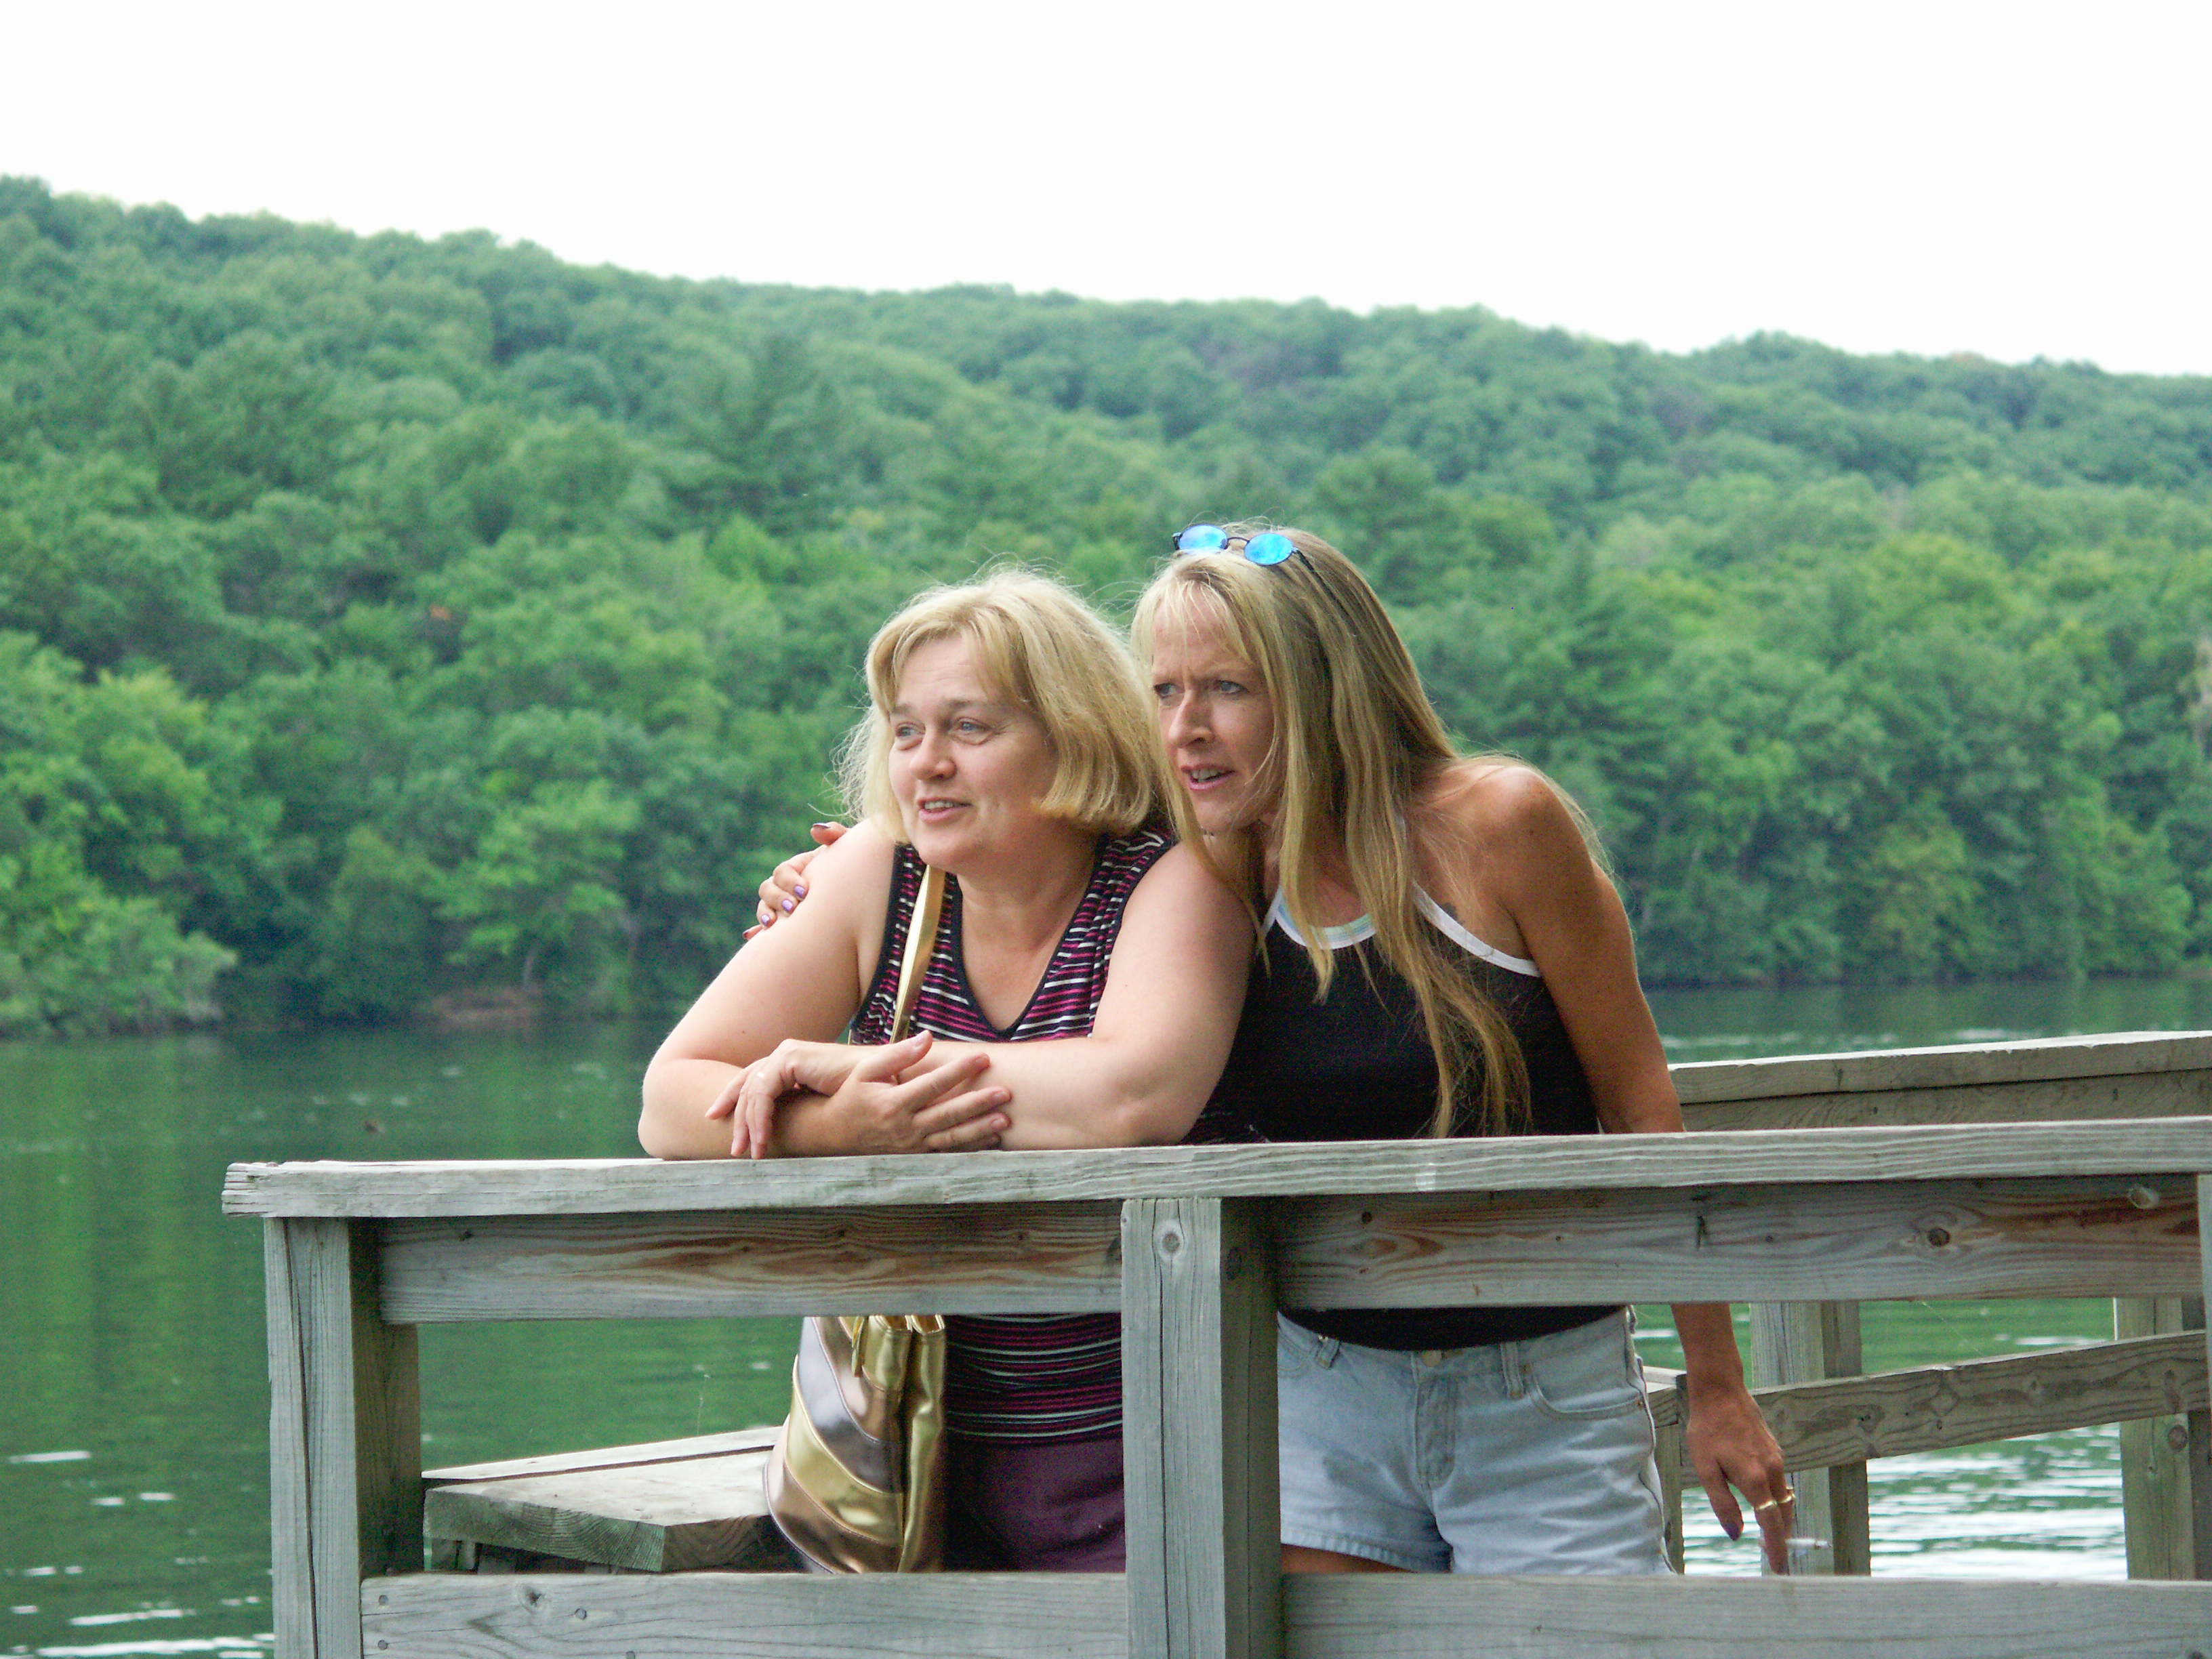 Deb and Anne enjoying a chat by the river